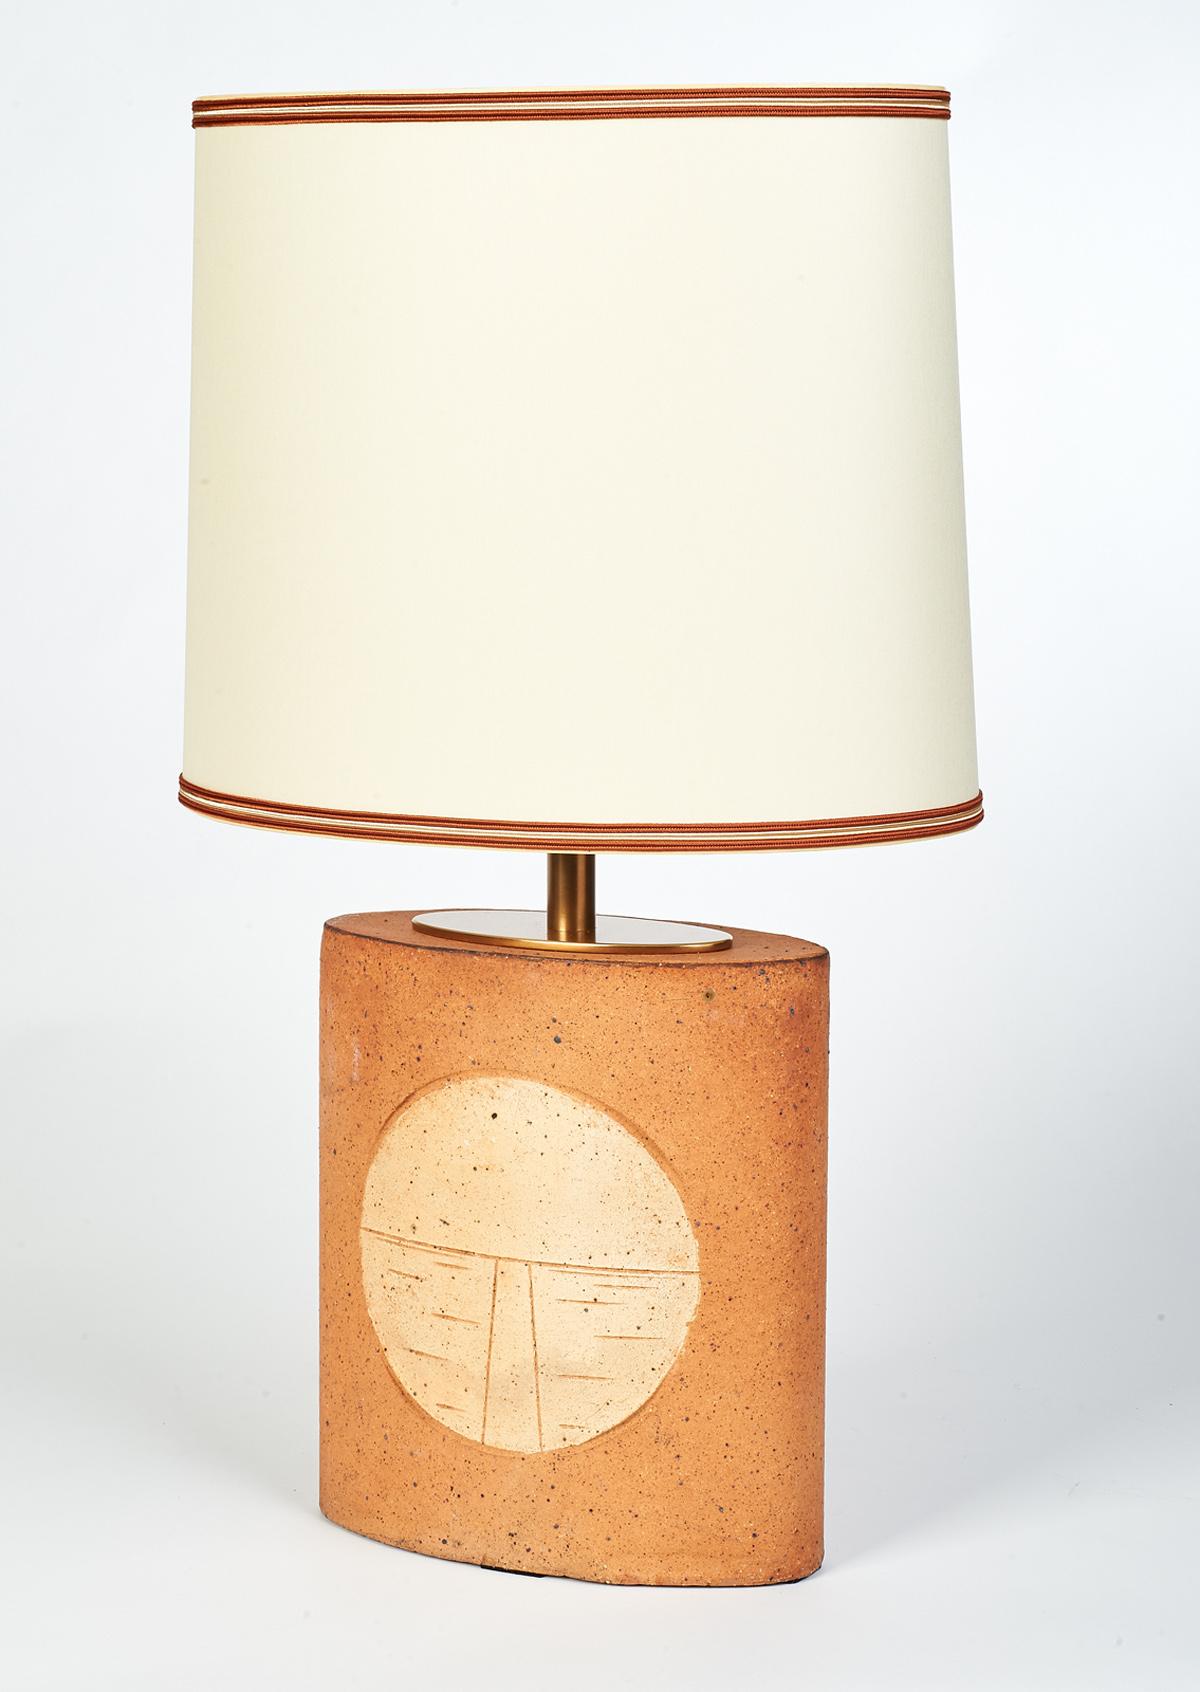 Mid-Century Modern Pair of Oval Ceramic Lamps with Incised Geometric Motif, France, 1970s For Sale